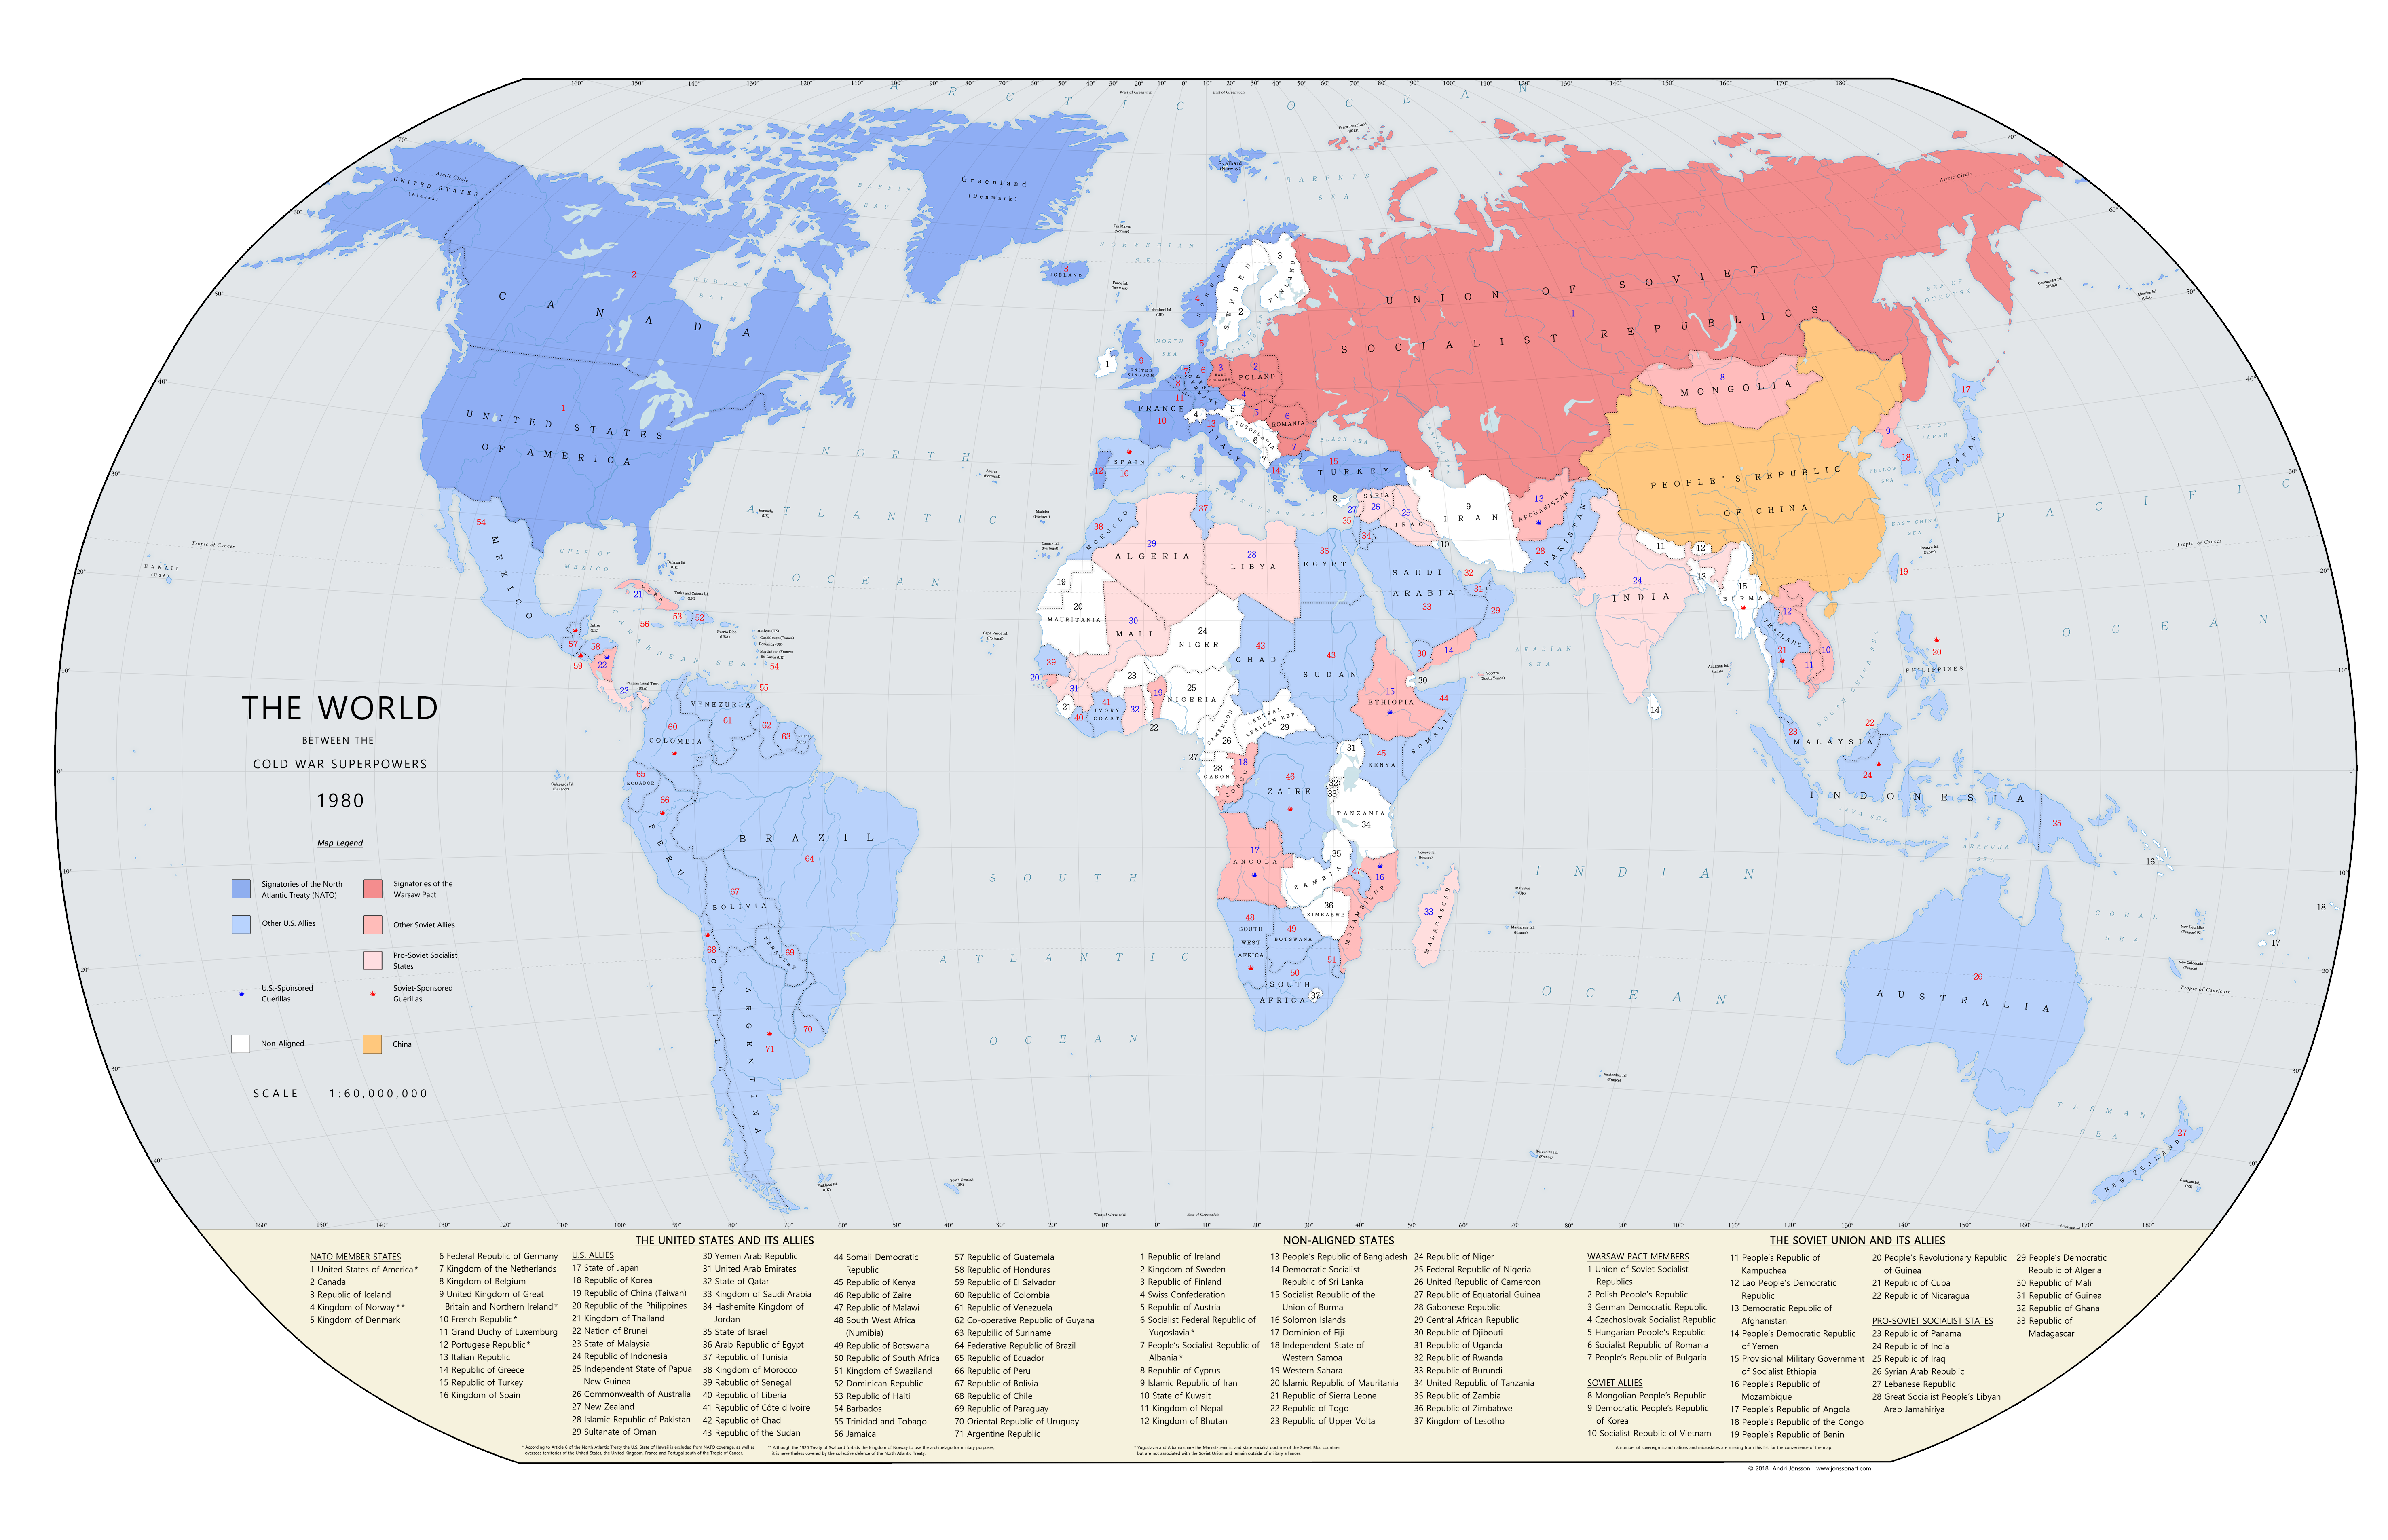 The World Between The Cold War Superpowers 1980 By